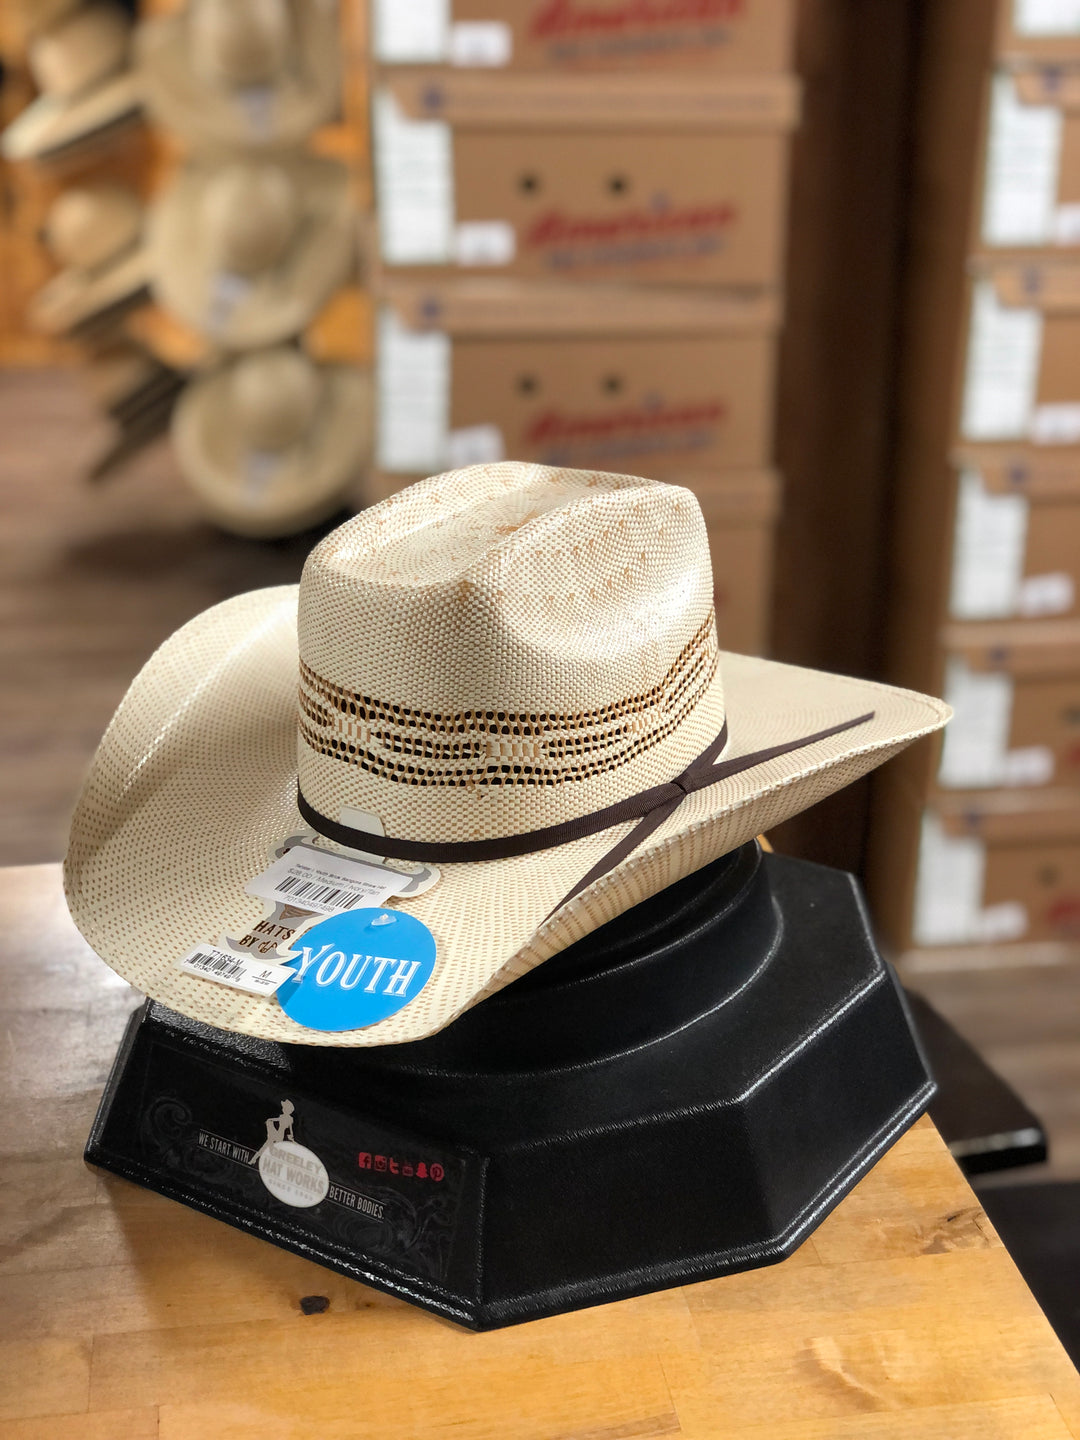 Twister  Light Hat Cleaner – Outpost Western Store